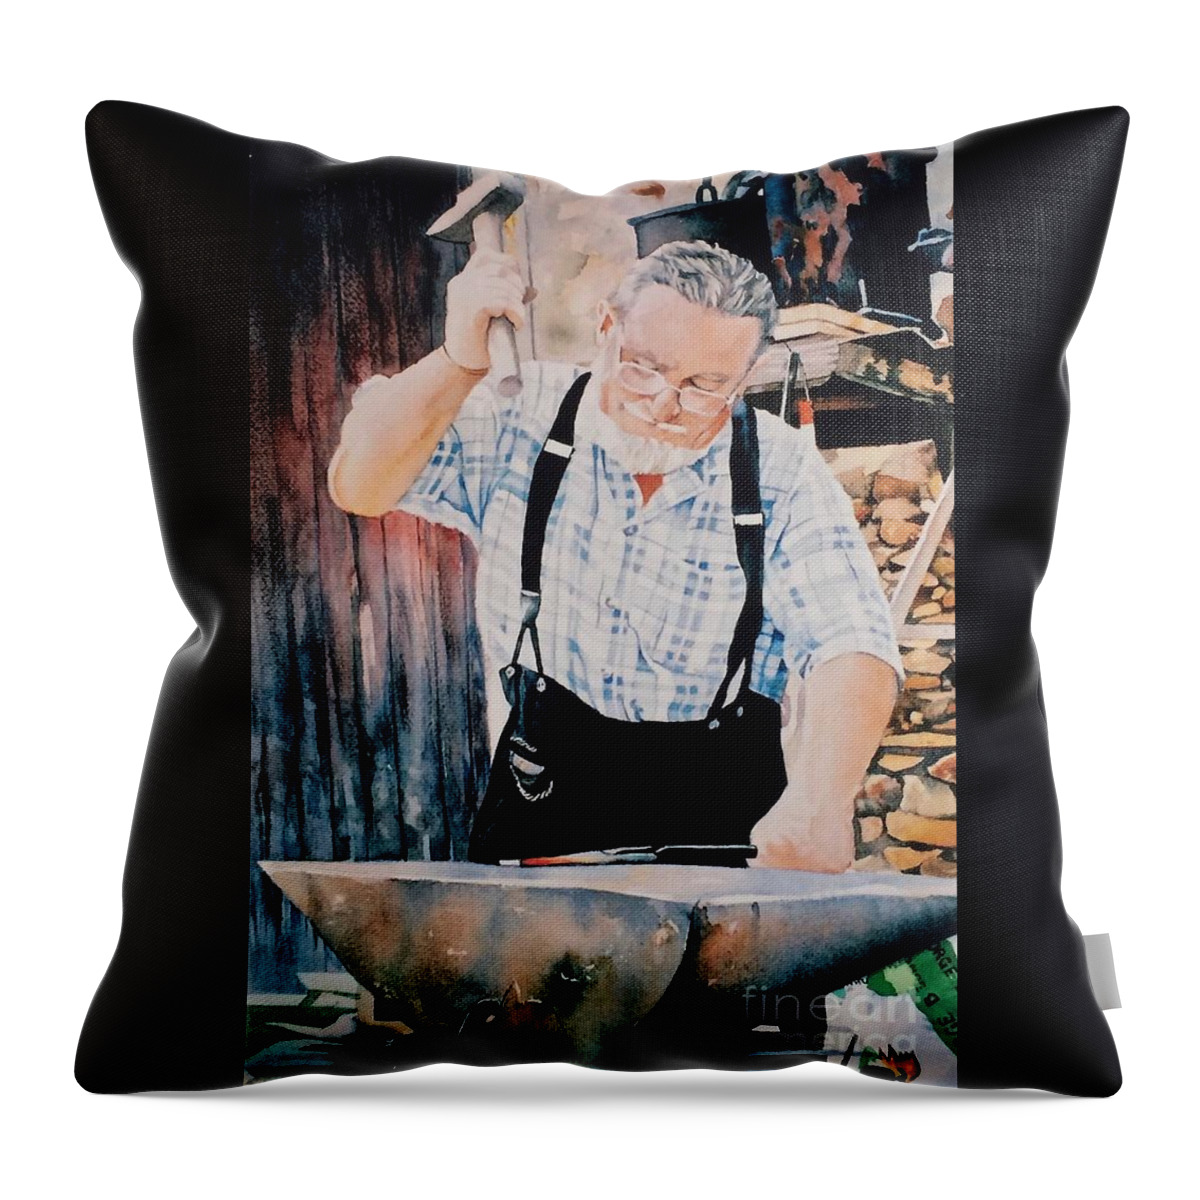 Painting Throw Pillow featuring the painting Le Forgeron by Francoise Chauray